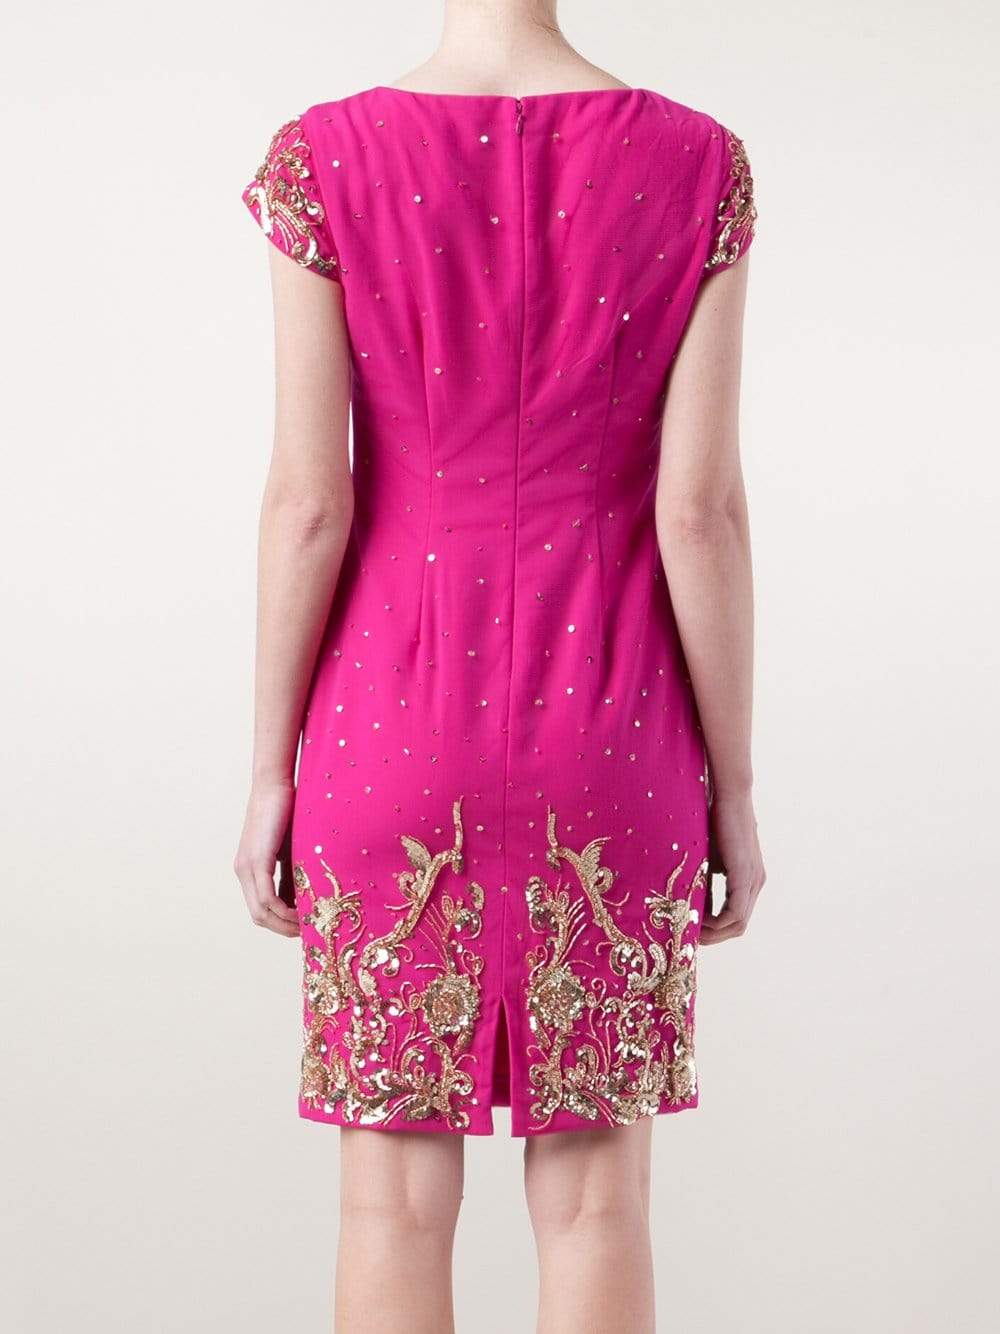 MARCHESA NOTTE-Beaded Shift Cocktail Dress-PINK